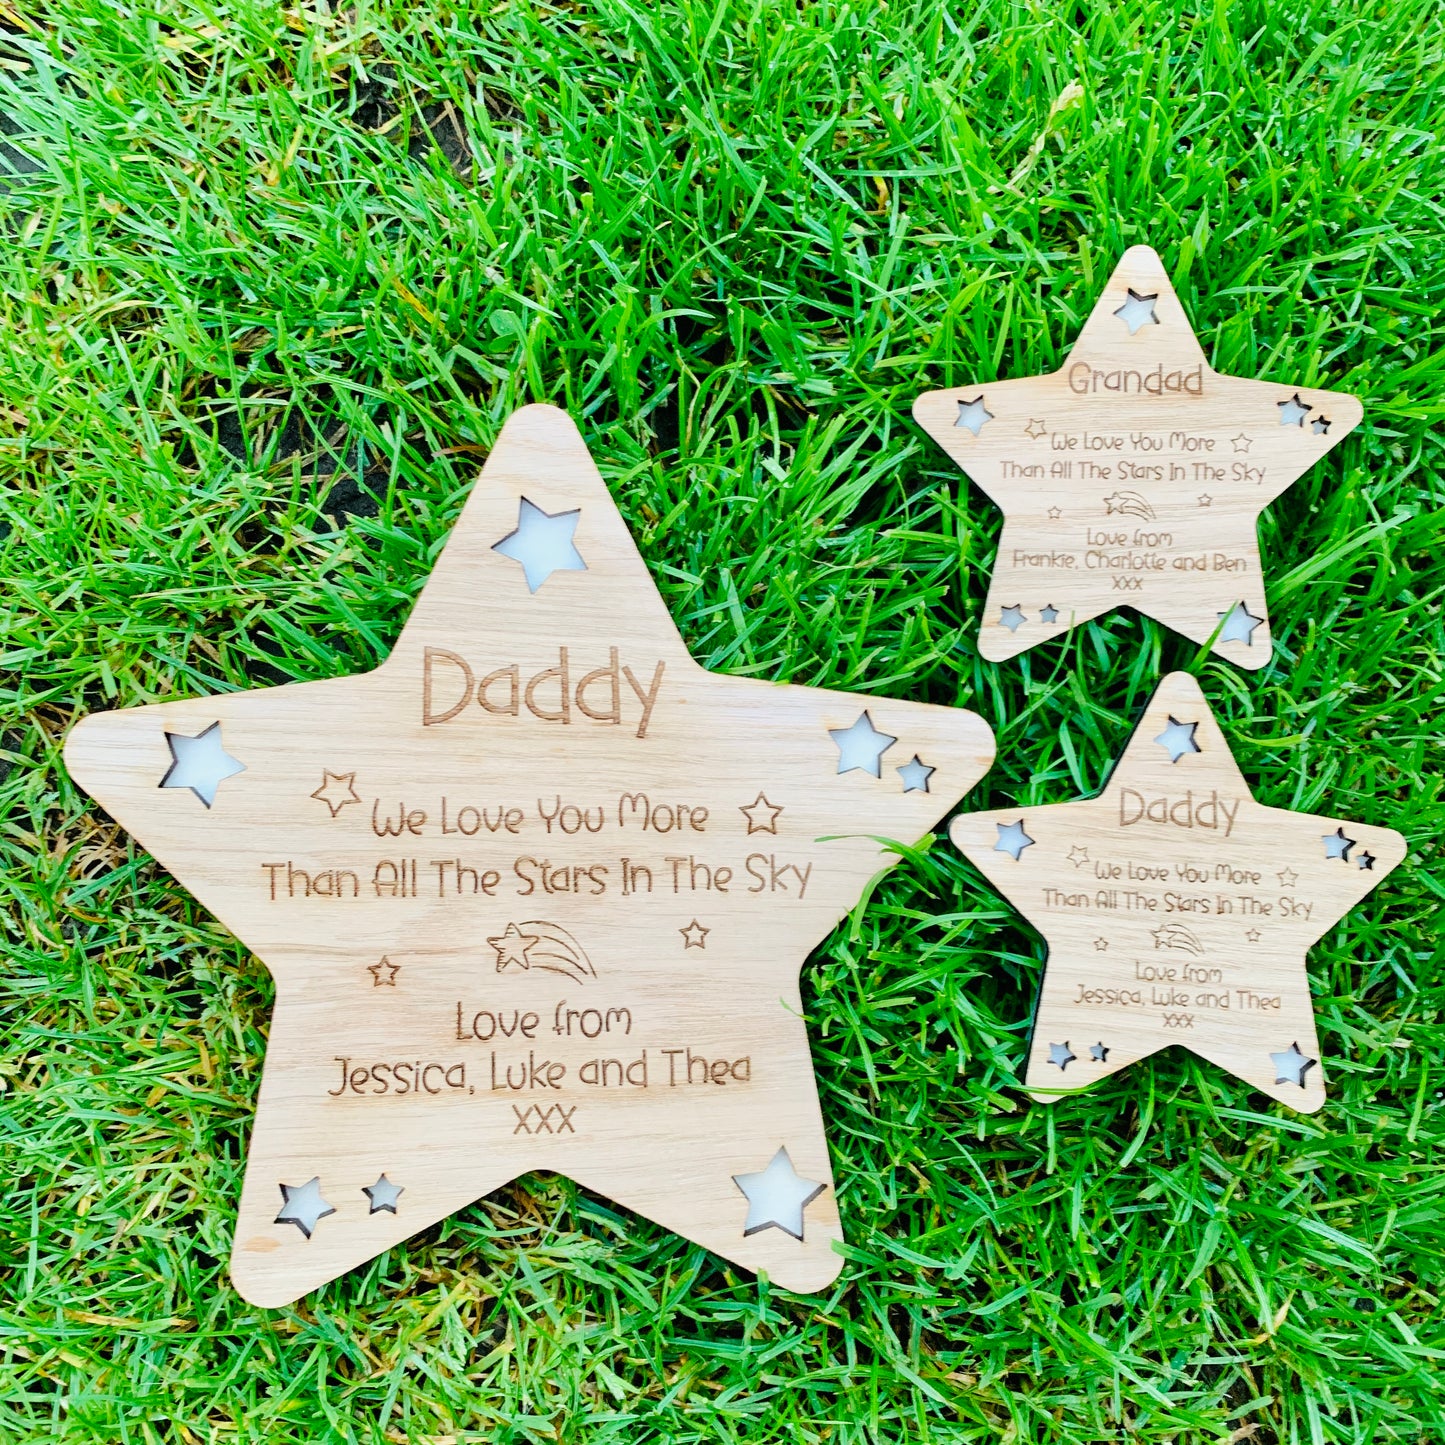 Personalised 'More Than All The Stars In The Sky' Fathers Day Plaque